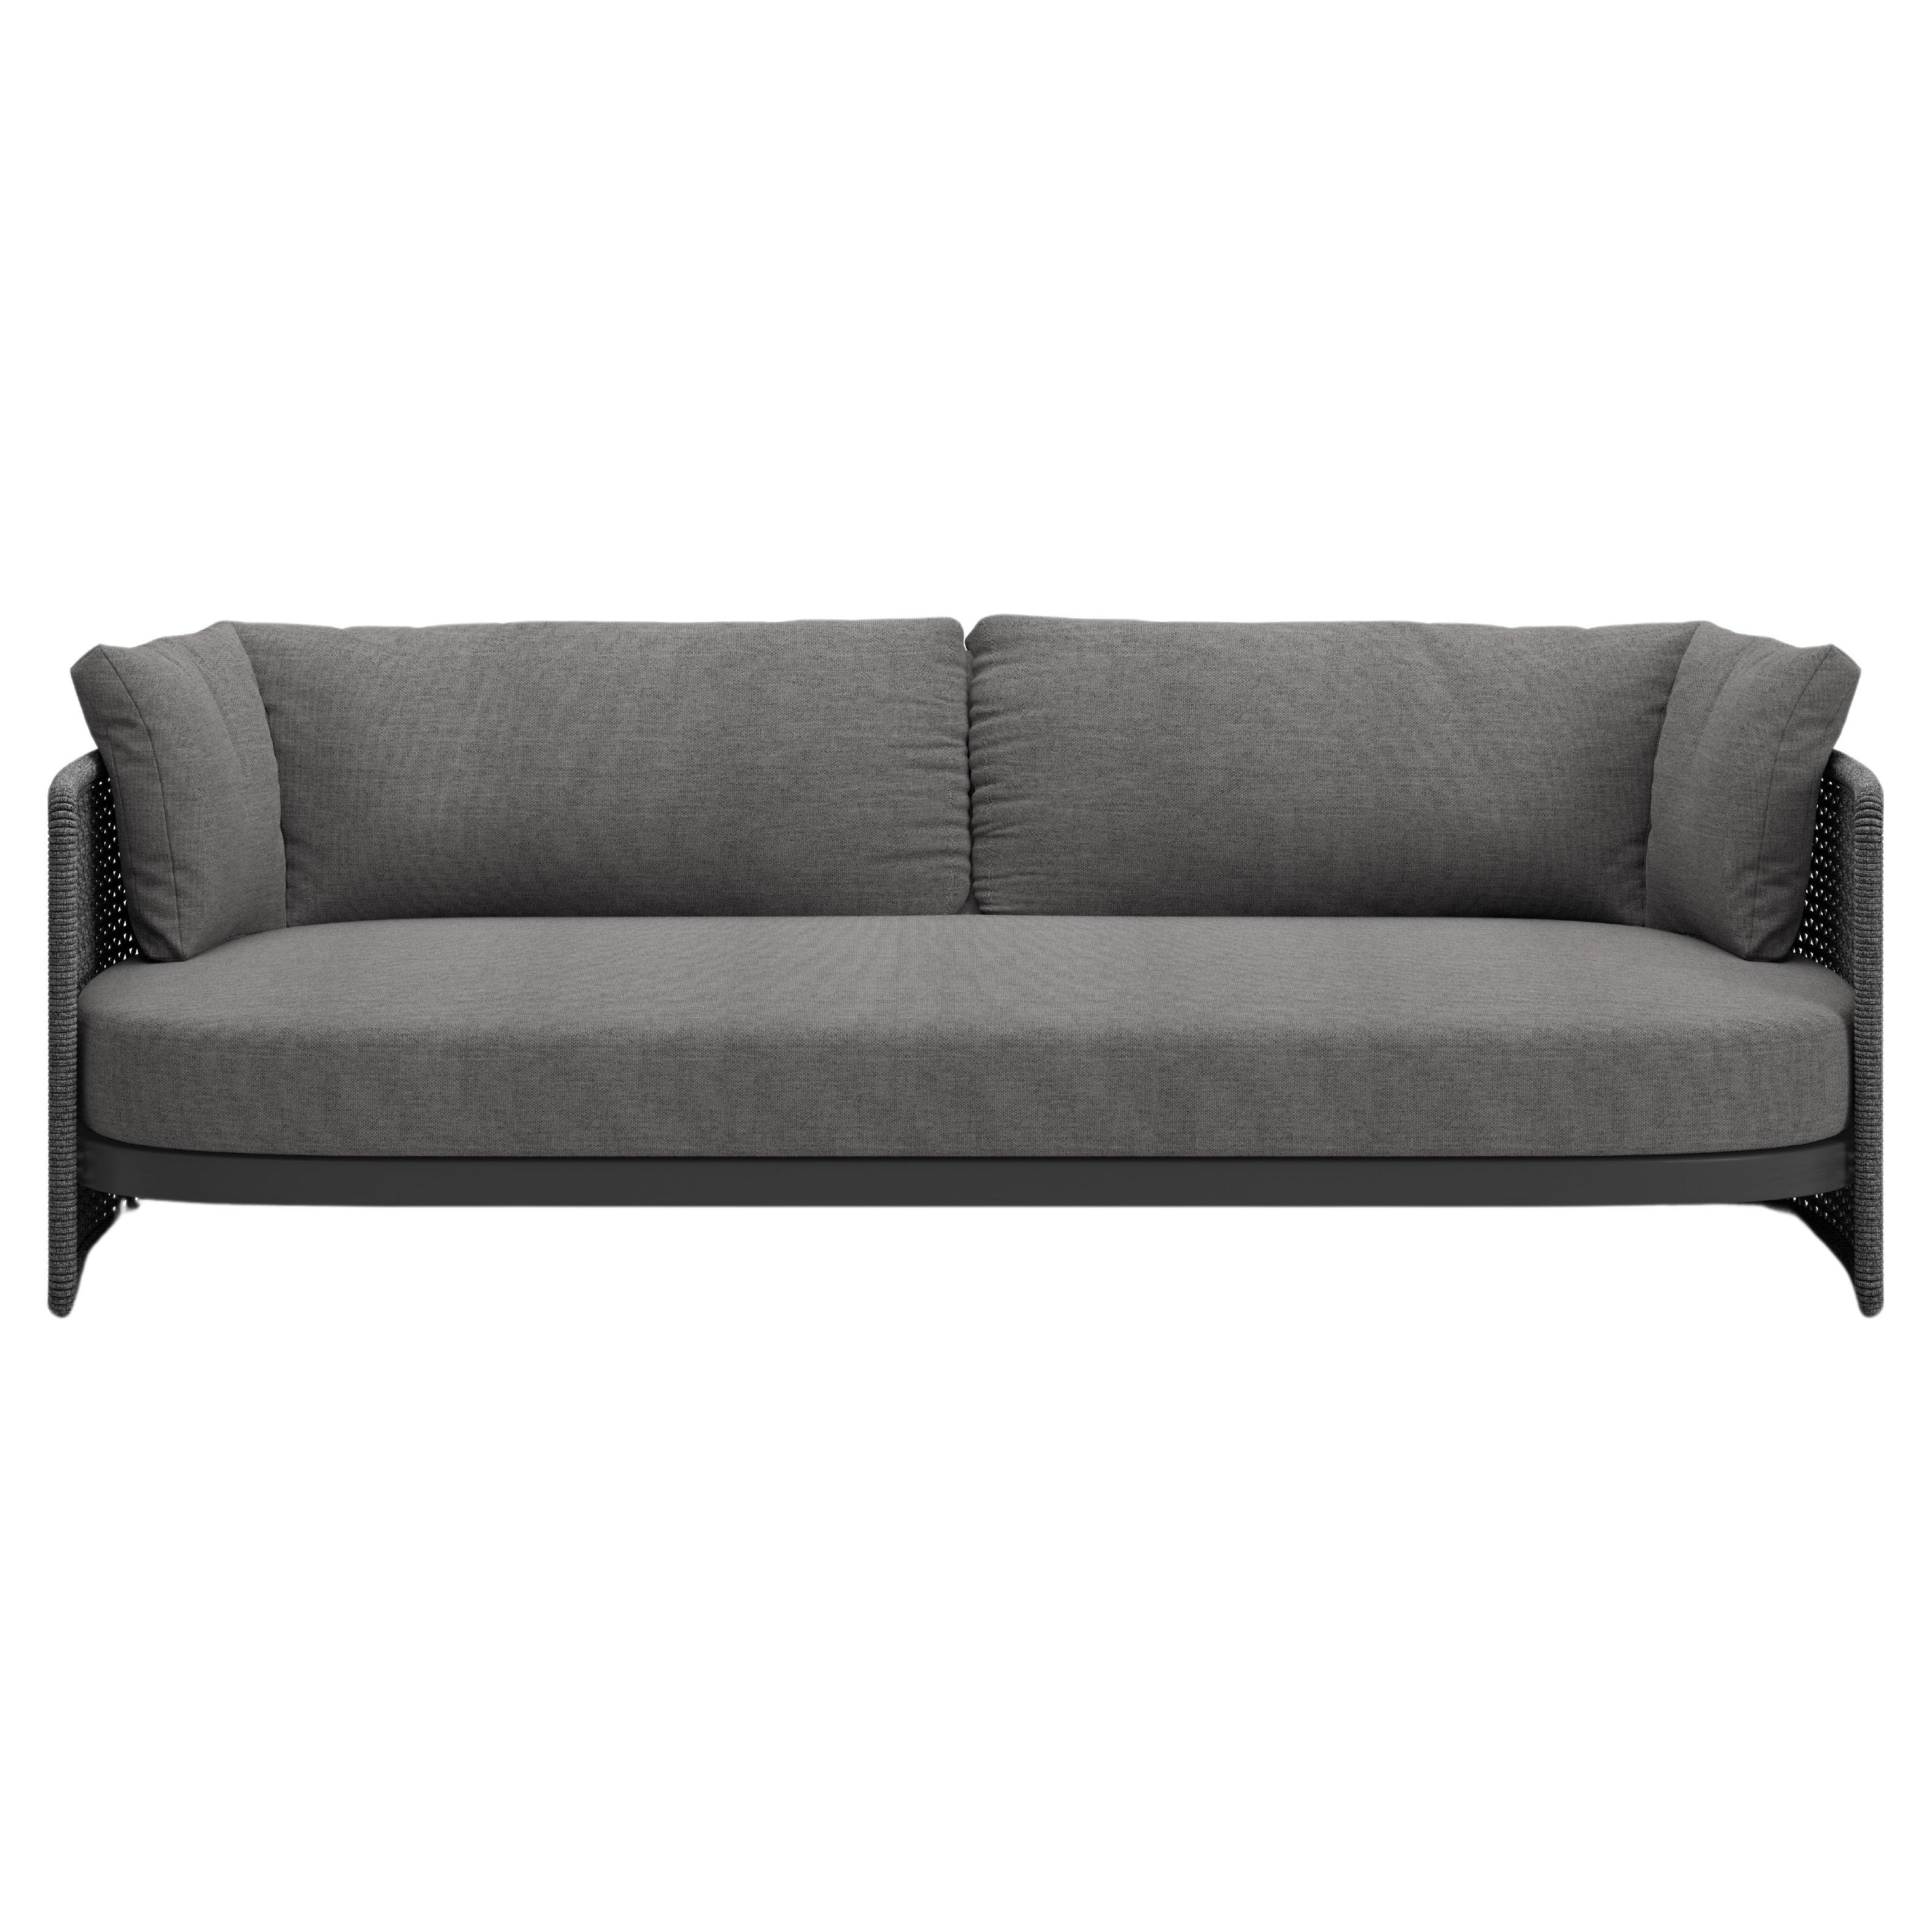 Miura-nighfall Outdoor 3 Seater Sofa by SNOC For Sale